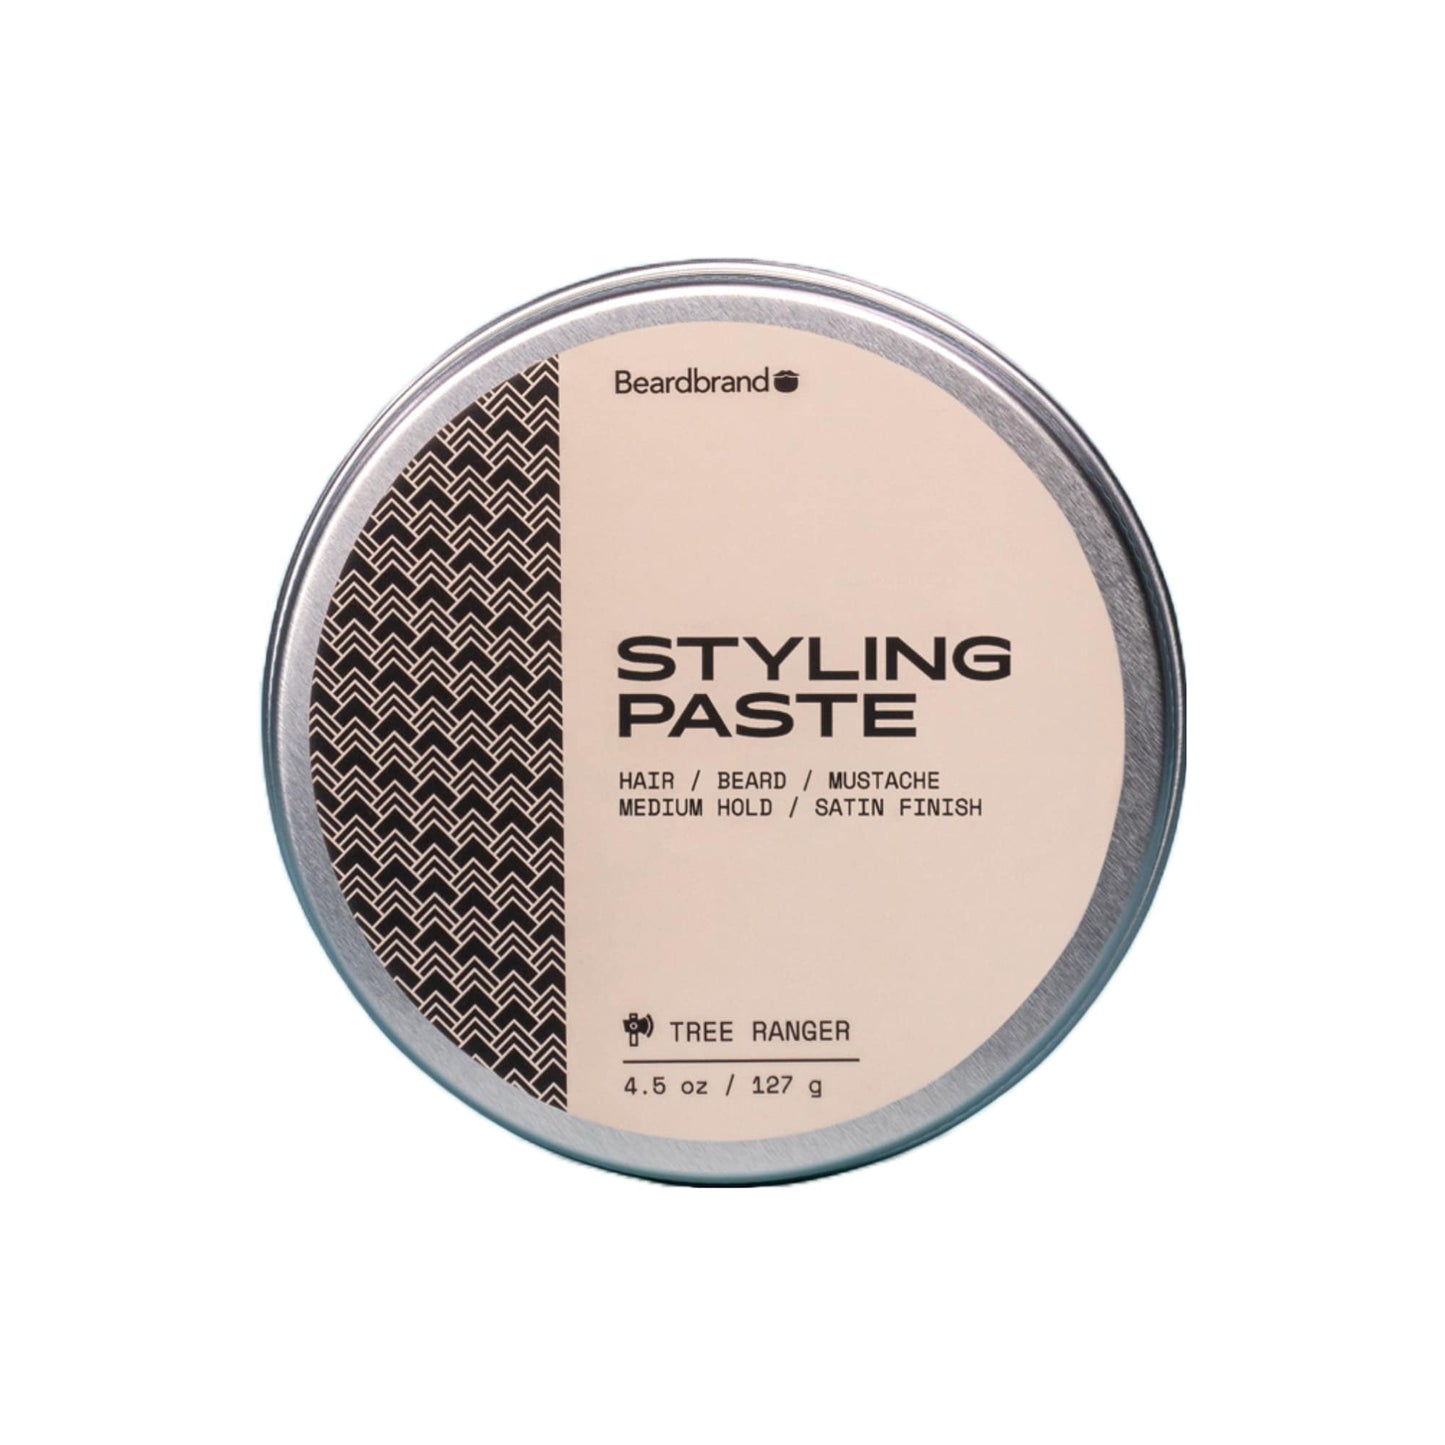 Primary Image of Tree Ranger Styling Paste